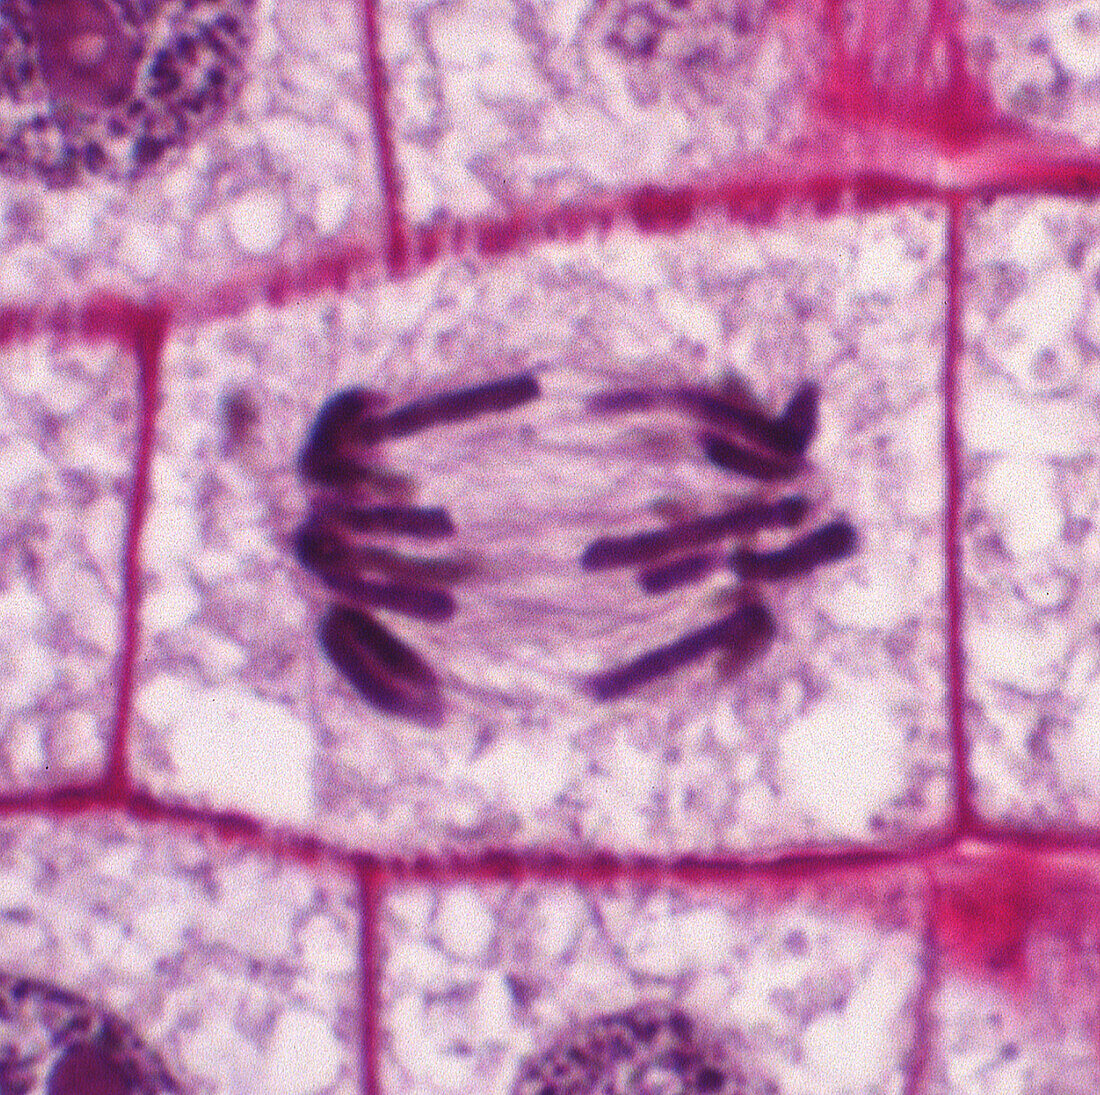 Anaphase in onion root tip cell, light micrograph